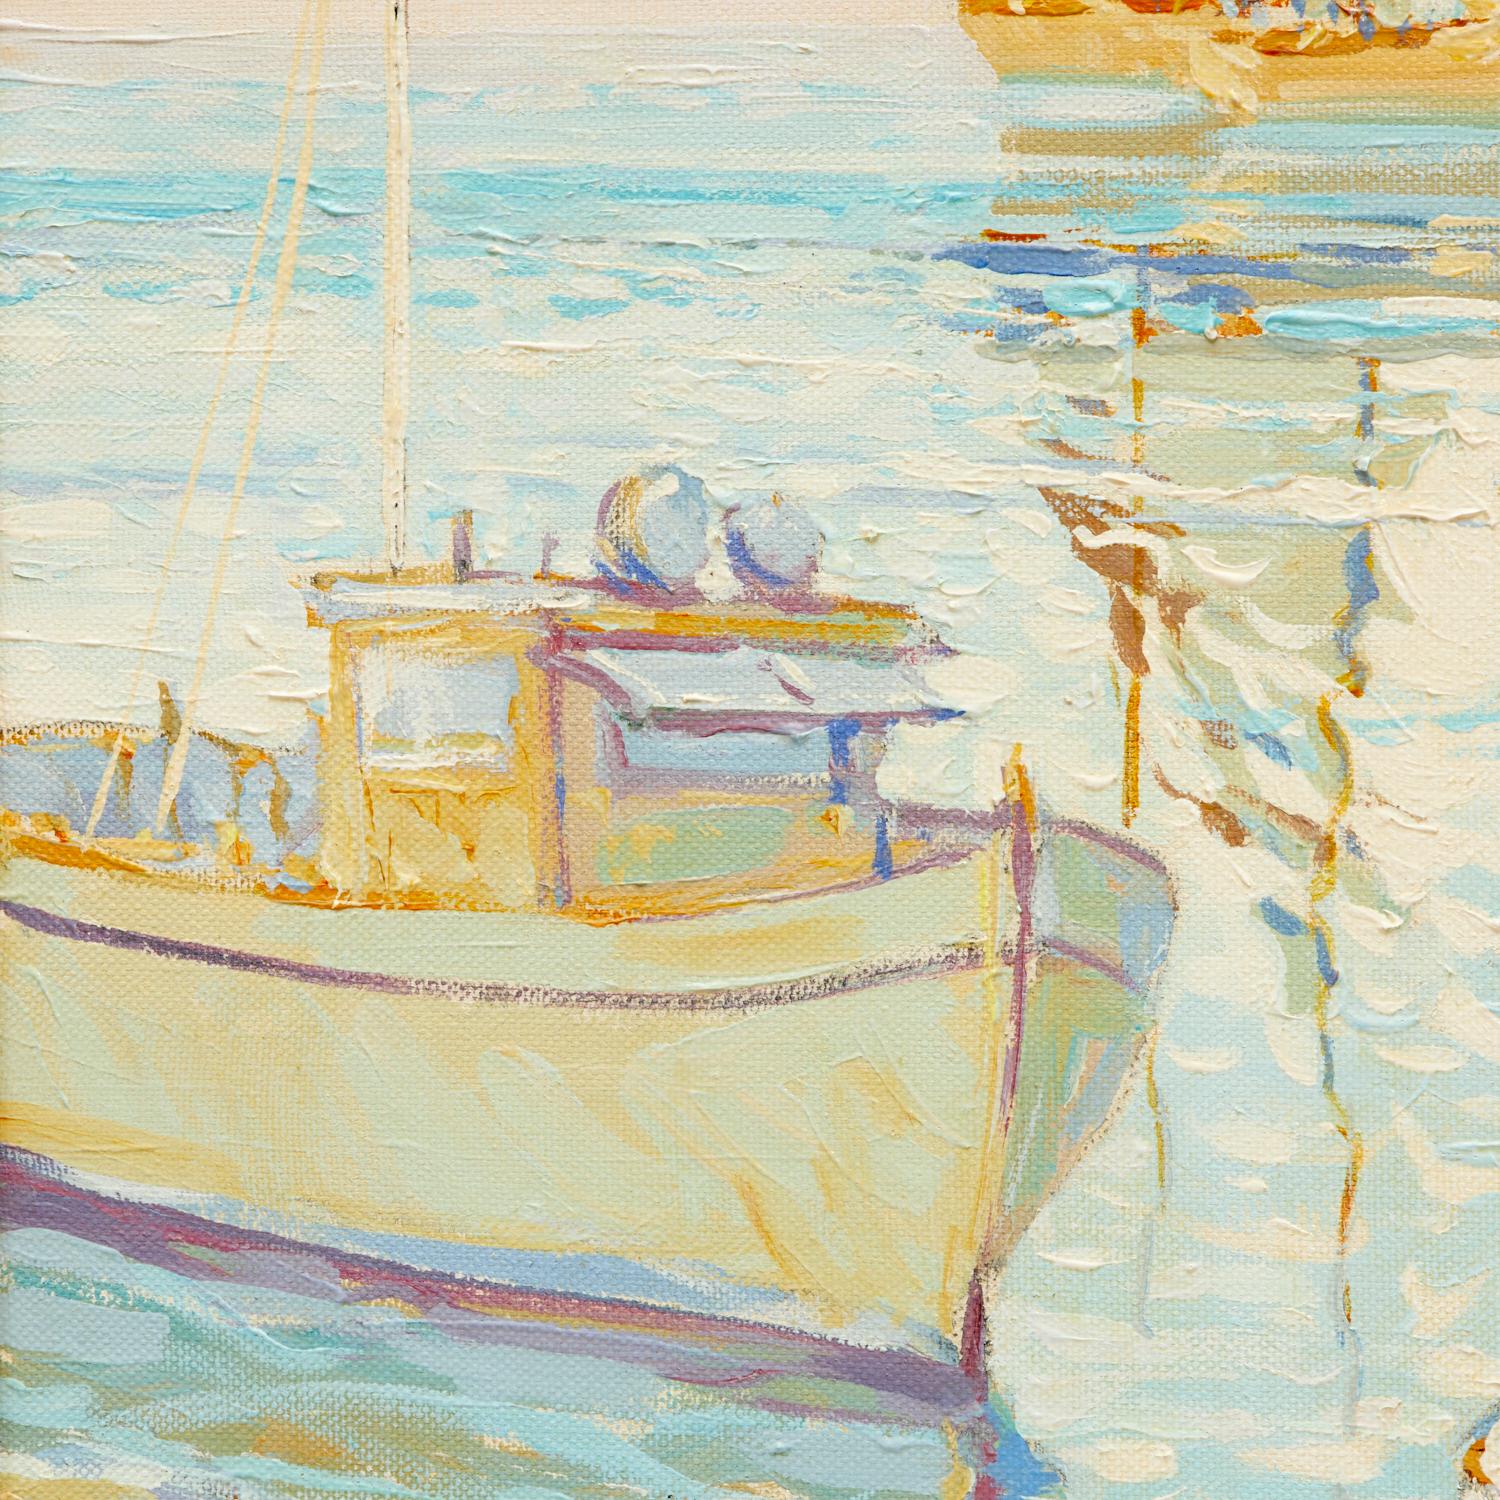 Hand-Painted 20th C. Docked Sailboats Impressionist Painting, Oil on Canvas, Anatoly Shlapak For Sale